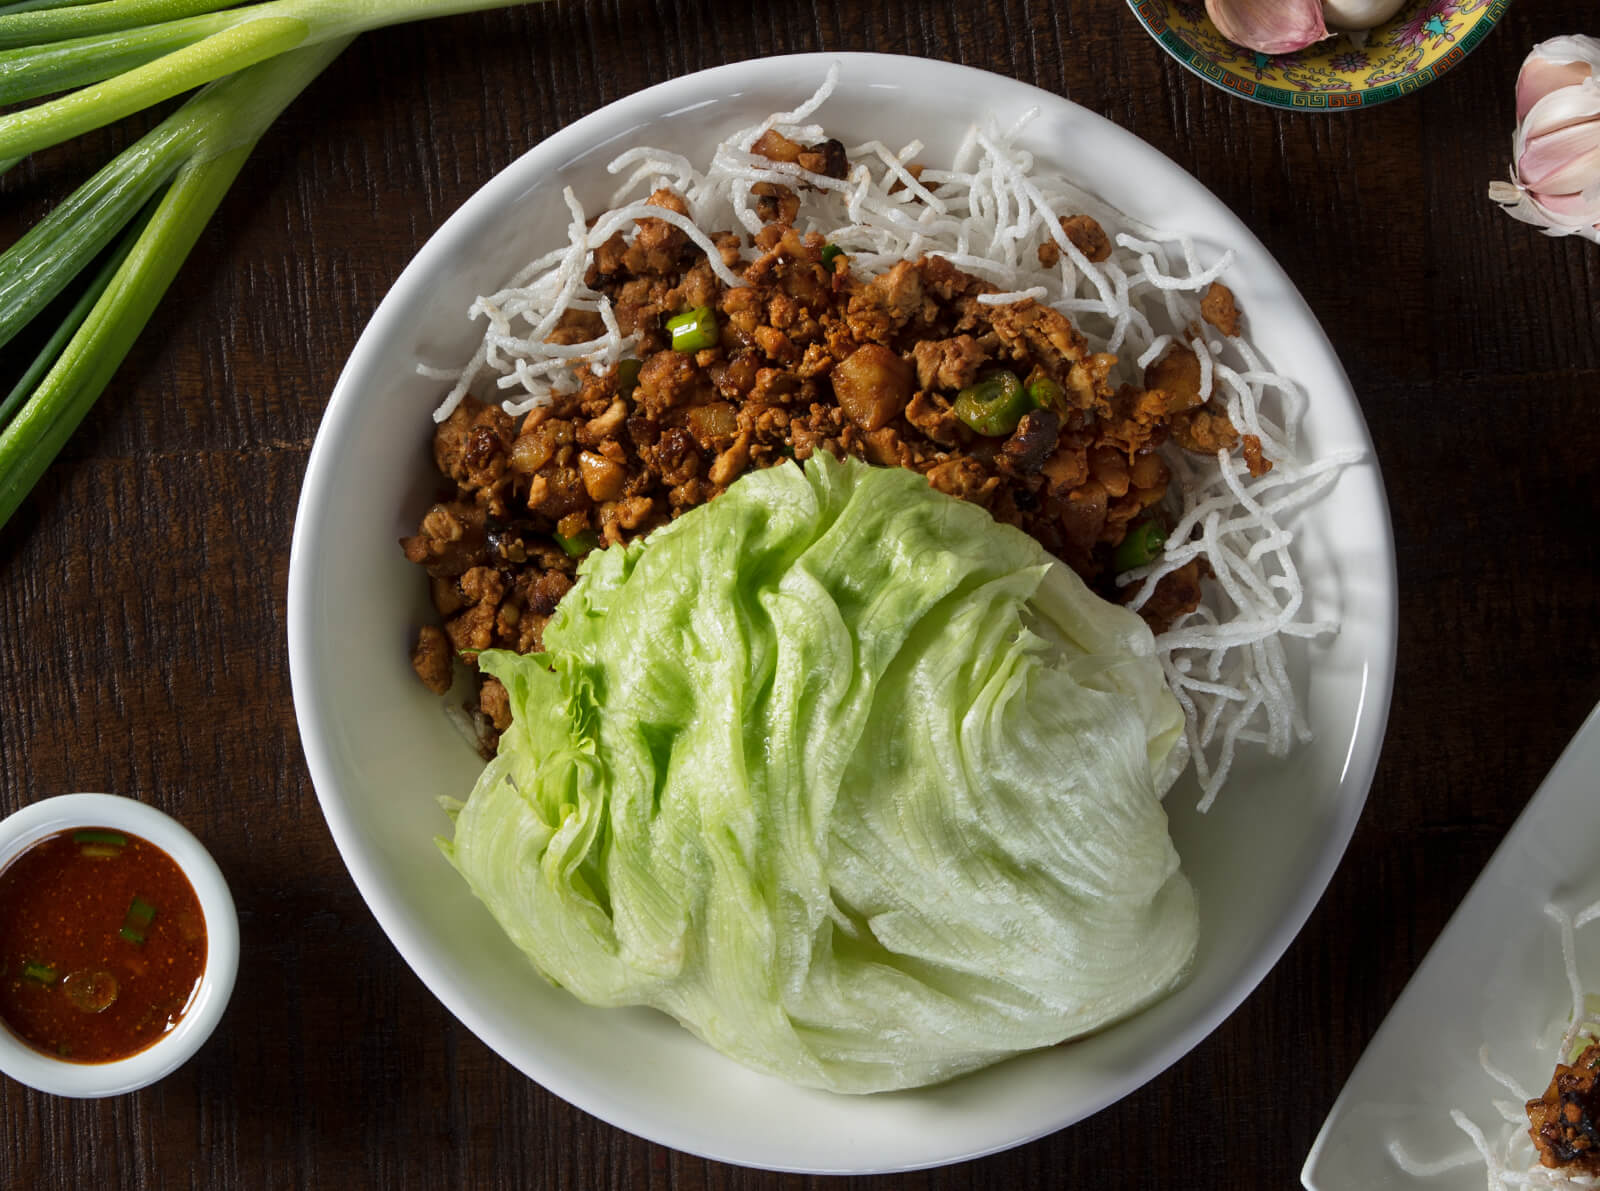 Today only: Free P.F. Chang’s lettuce wraps with entrée purchase